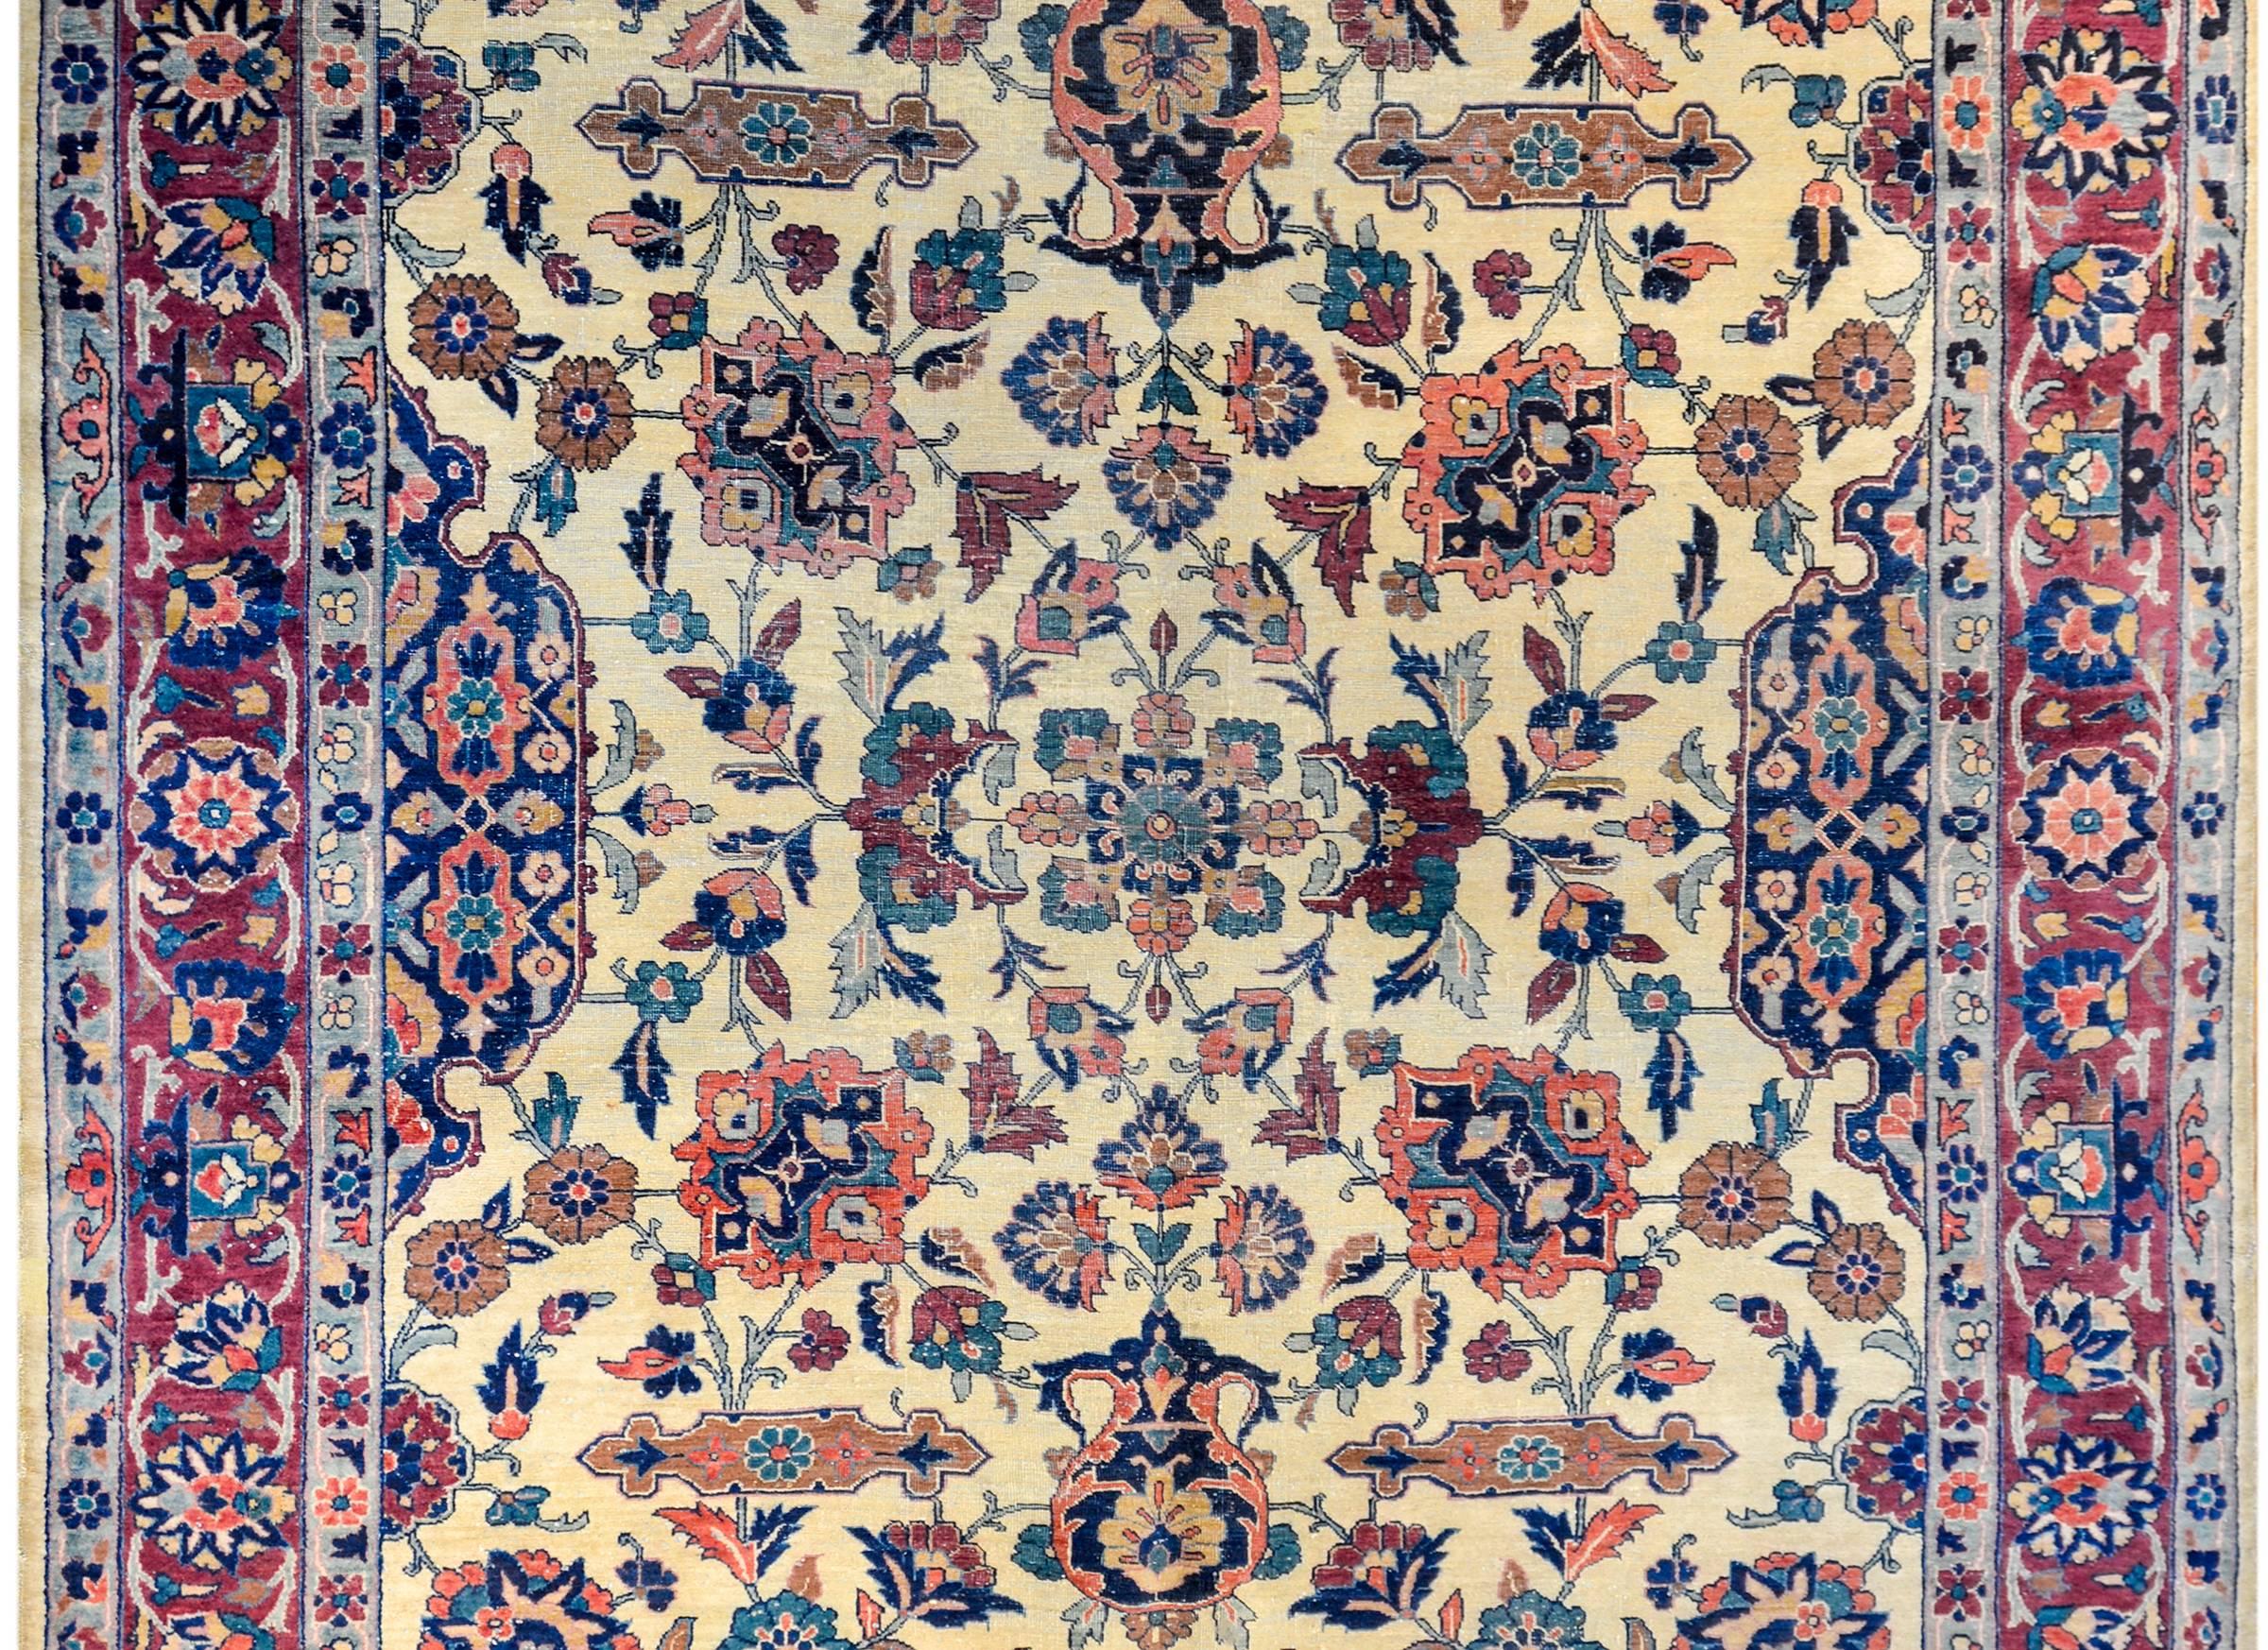 An exceptional late 19th century Persian Sarouk Mohajeran rug with a beautiful mirrored finely woven field of myriad flowers and vines woven in indigo, pink green, and crimson, on a pale yellow vegetable dyed wool background. The border is